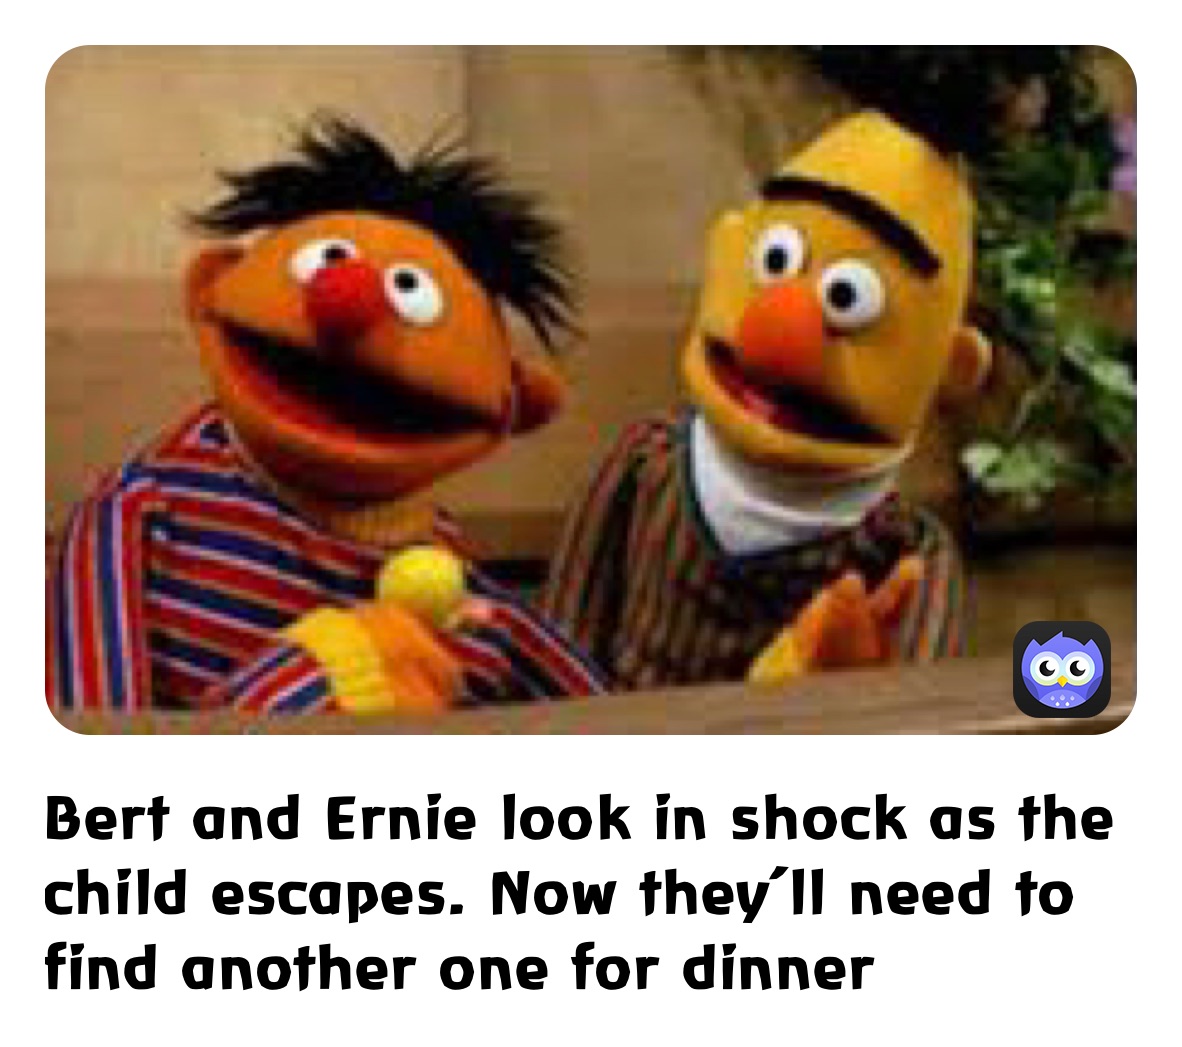 Bert and Ernie look in shock as the child escapes. Now they’ll need to find another one for dinner